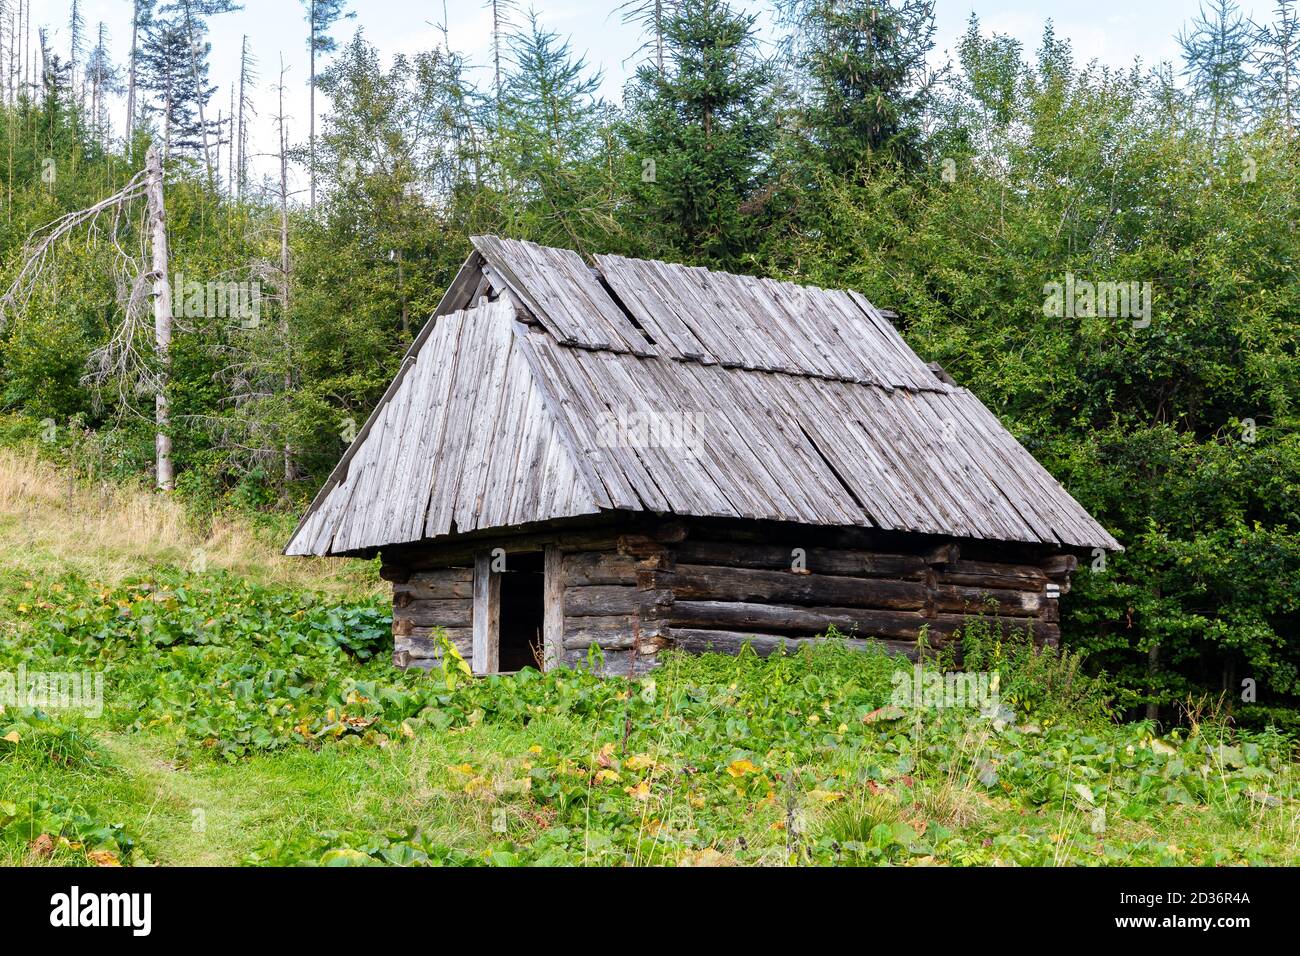 Traditional Polish highlander style wooden shepherd hut on a clearing, among pine trees in Koscieliska Valley in Tatra Mountains, Poland Stock Photo